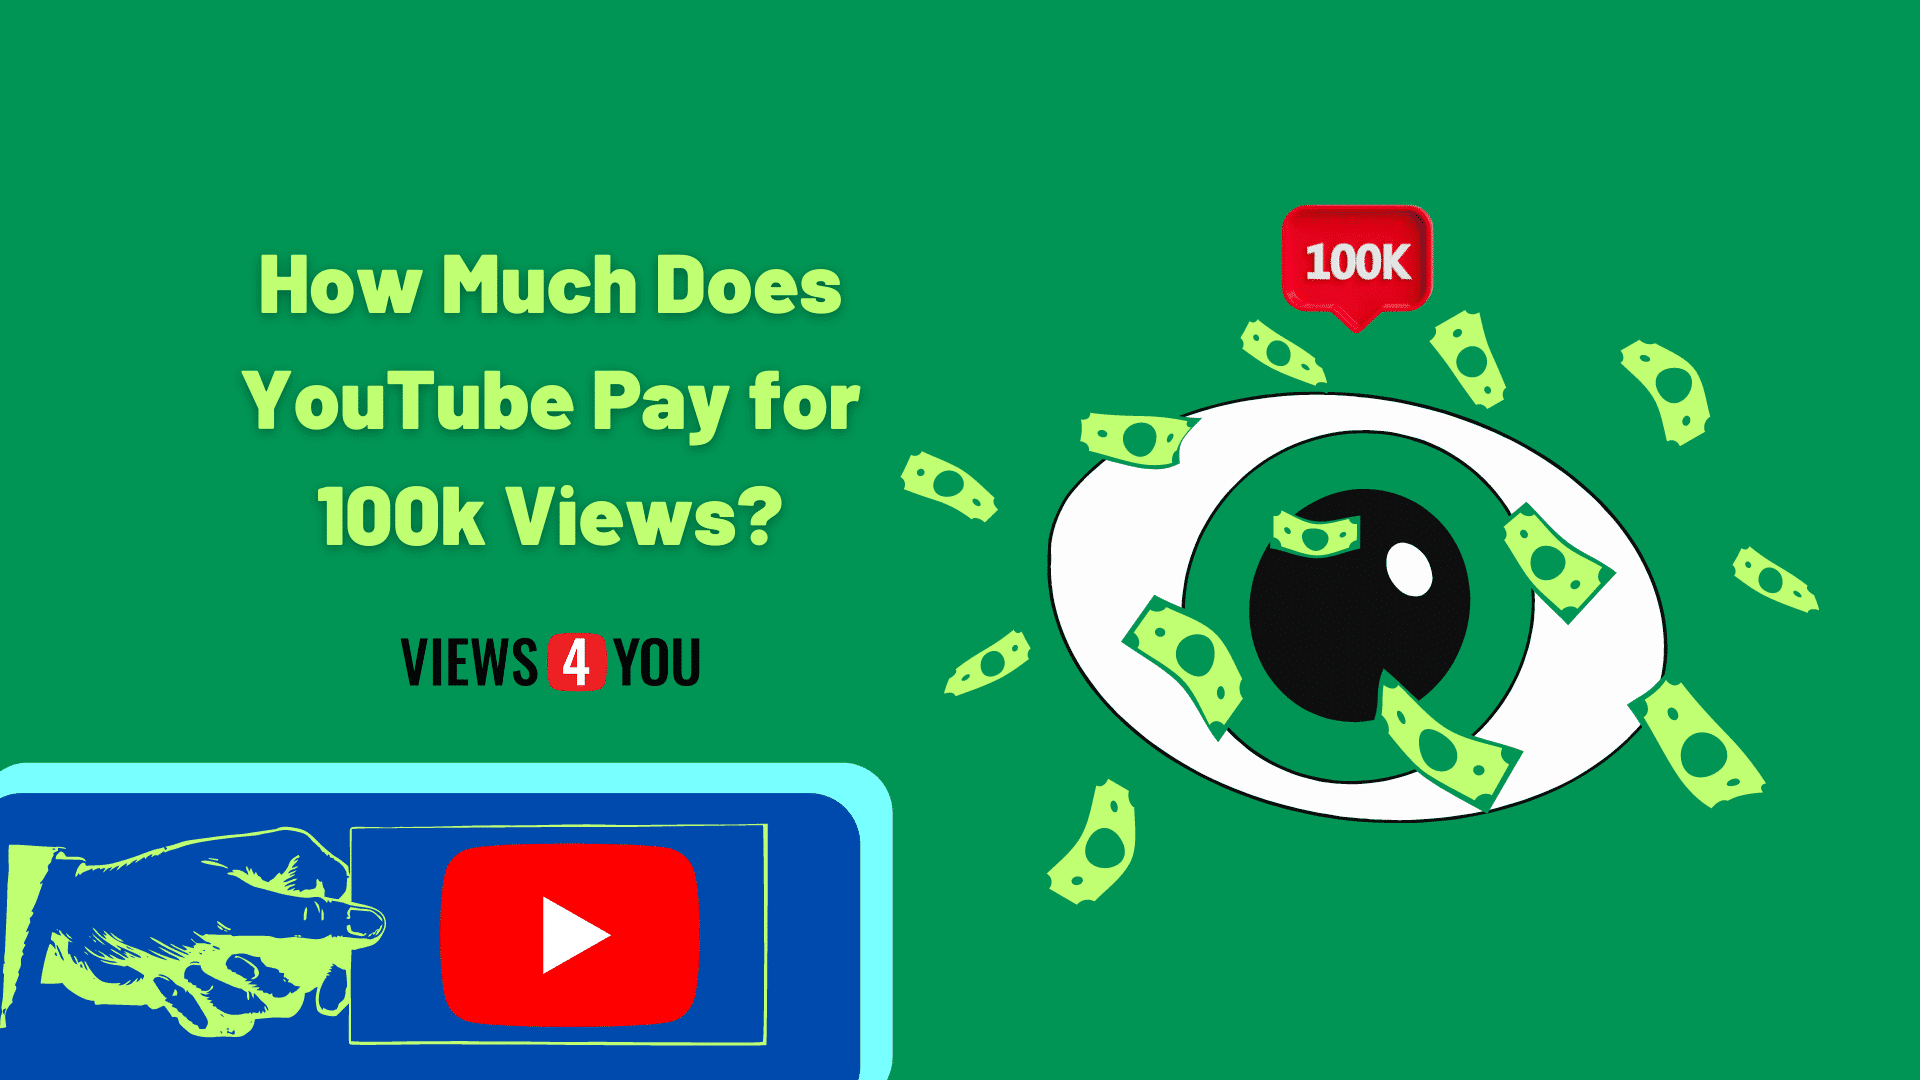 How Much Does YouTube Pay for 100k Views